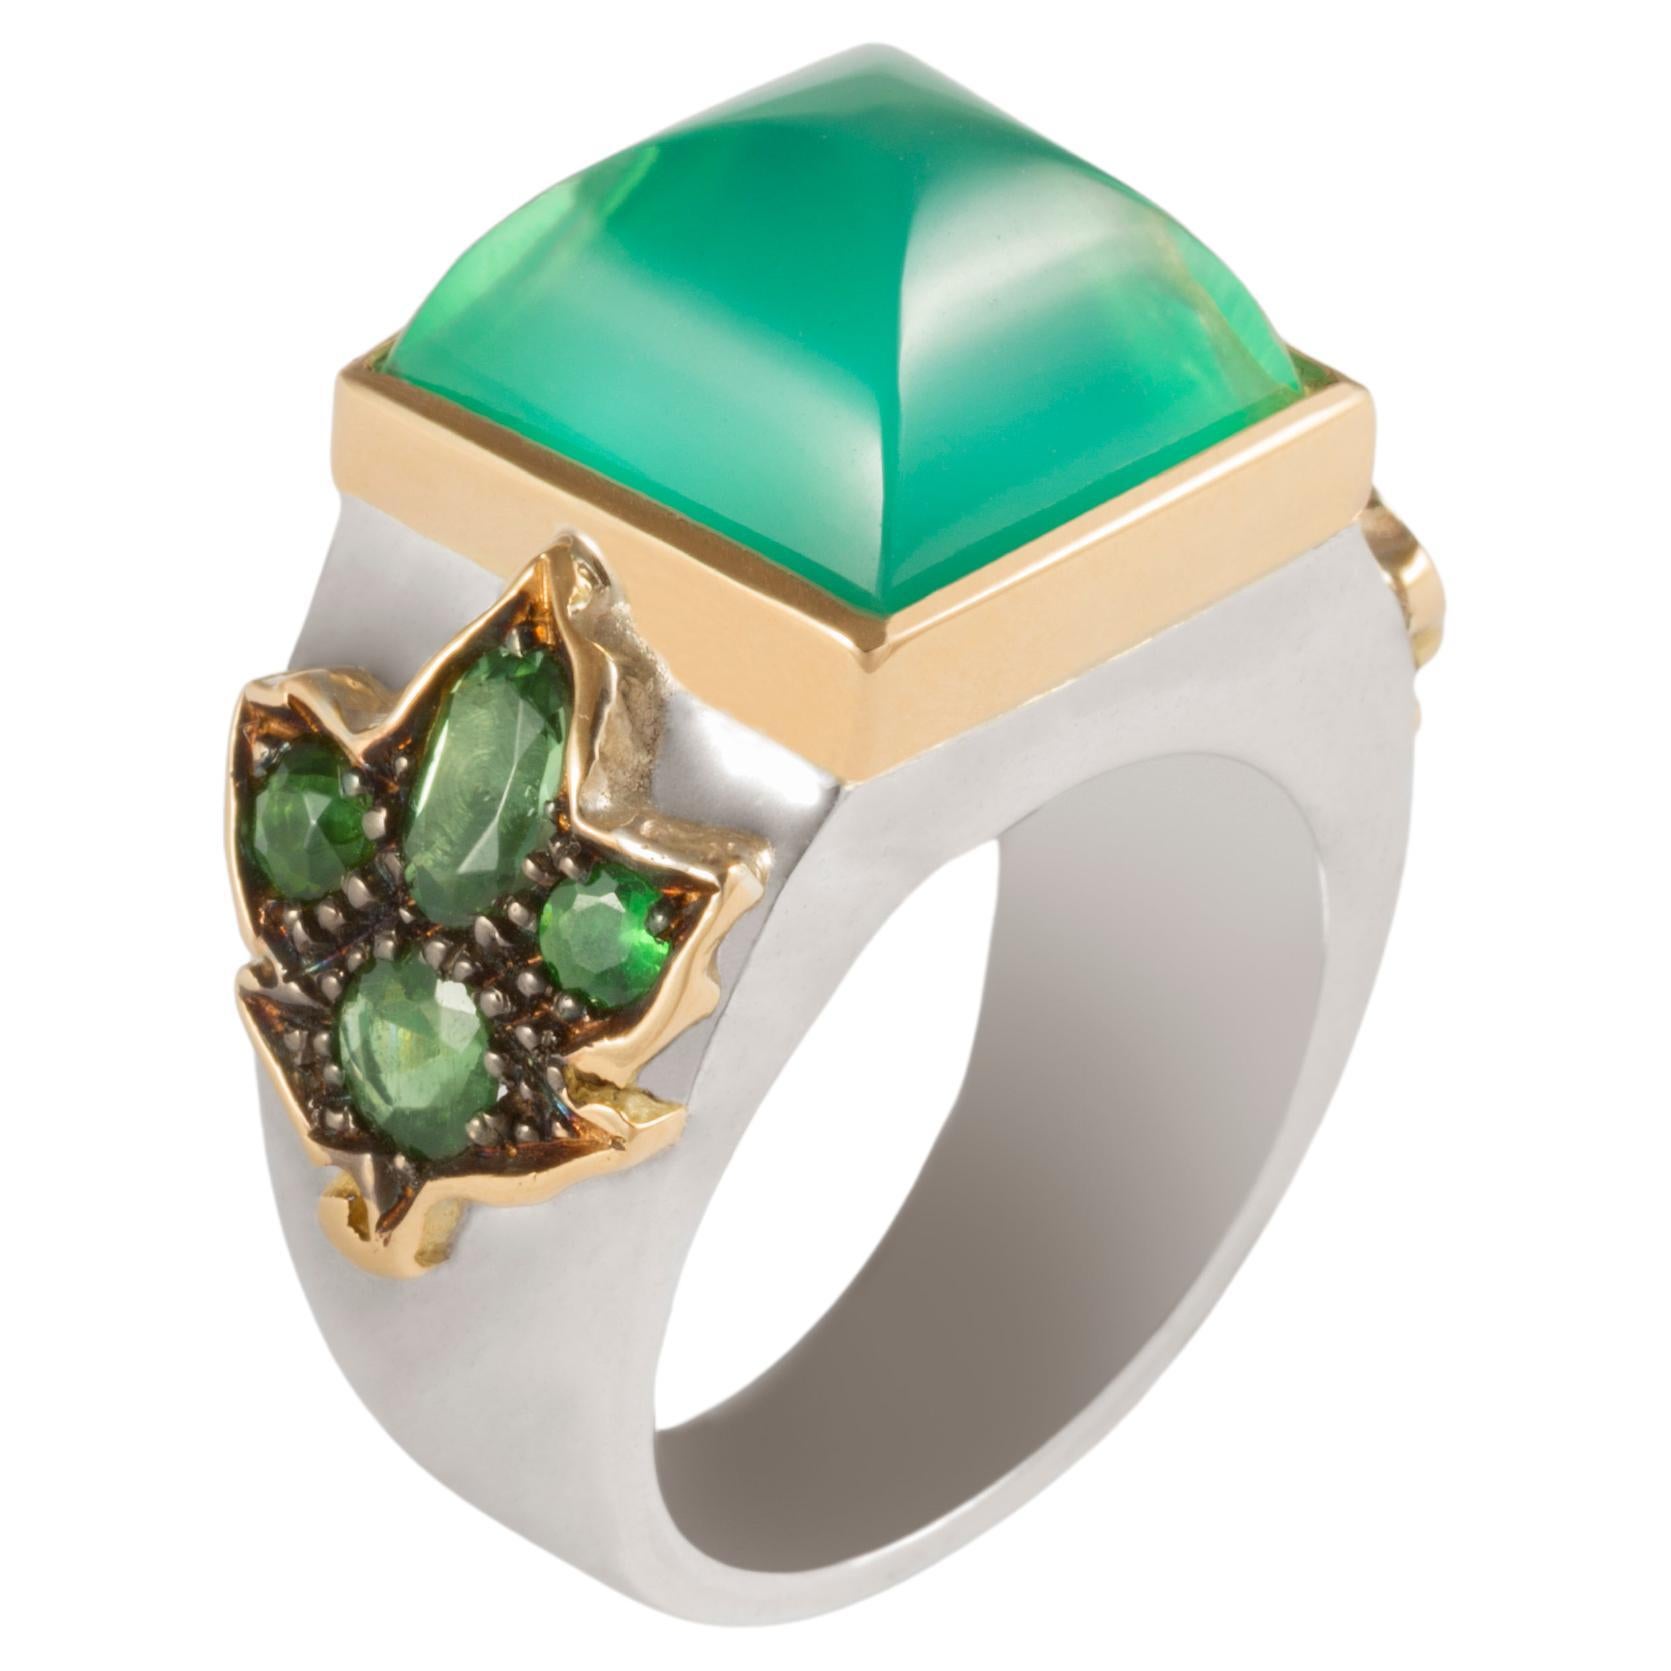 Rossella Ugolini Bold Naturalist Green Agate Cocktail Ring with Tourmalines  For Sale